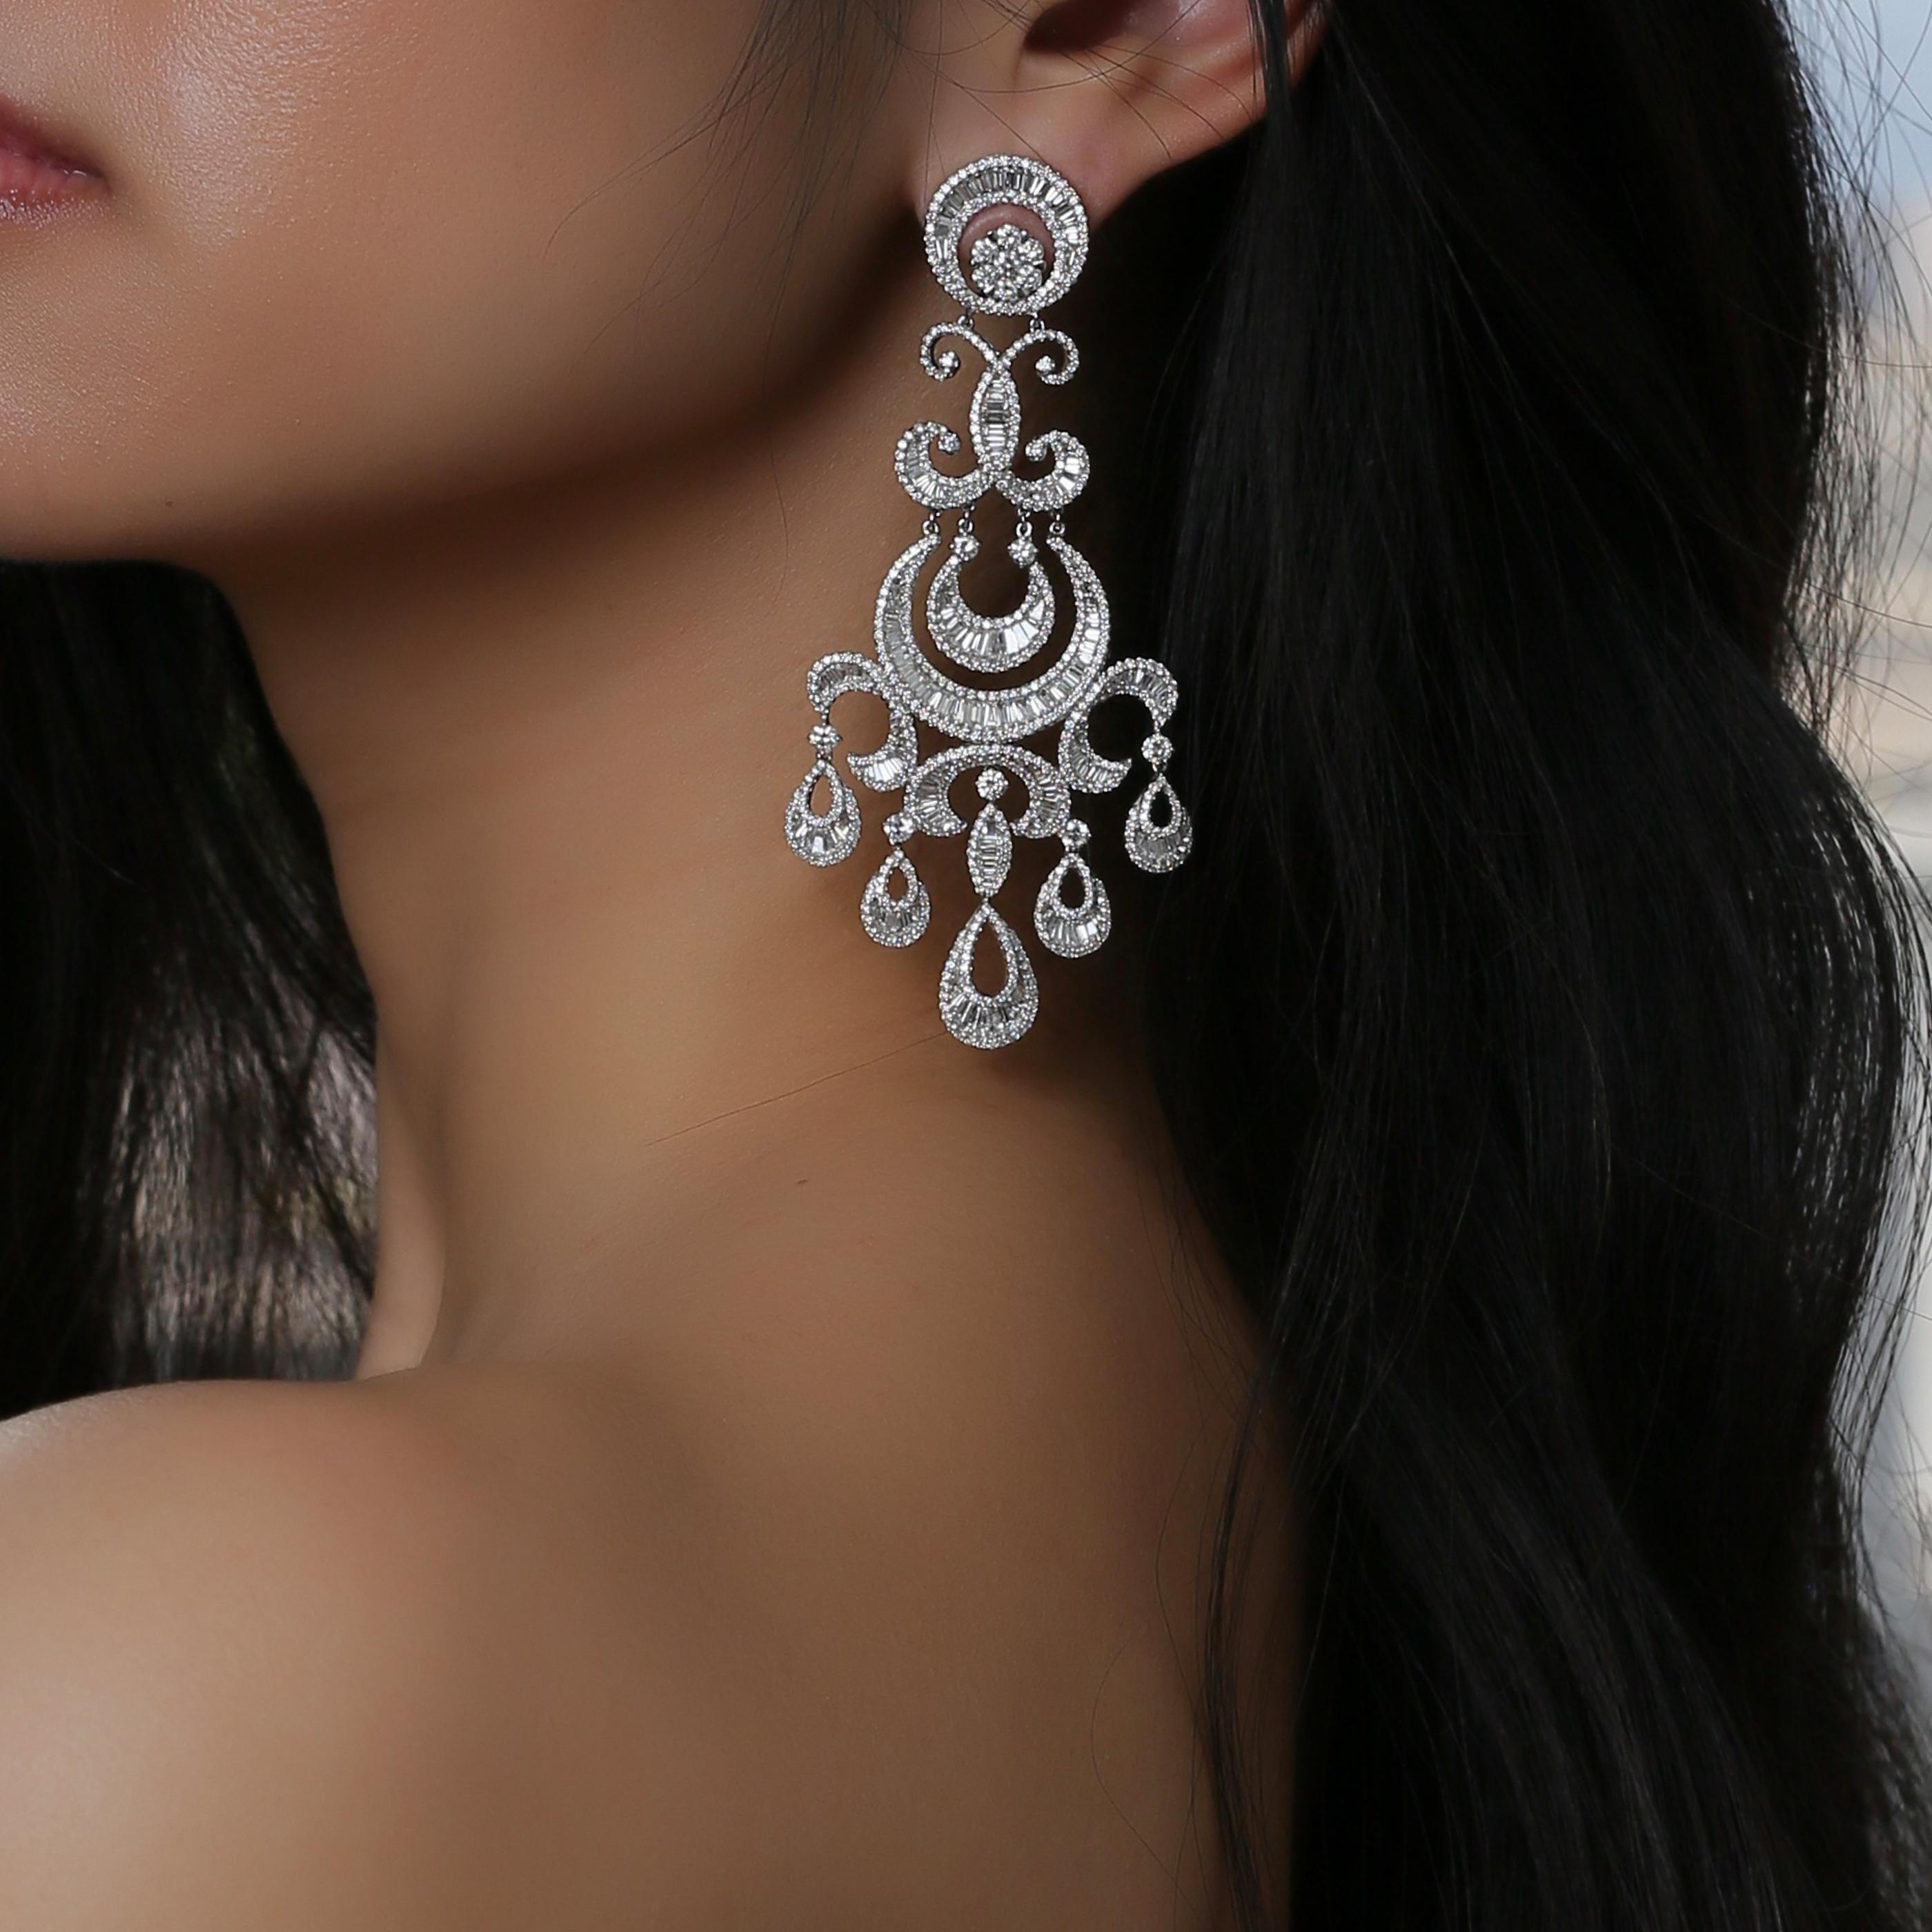 18 Karat White Gold White Diamond Crescent Moon Baguette Dangling Earring In New Condition For Sale In Los Angeles, CA